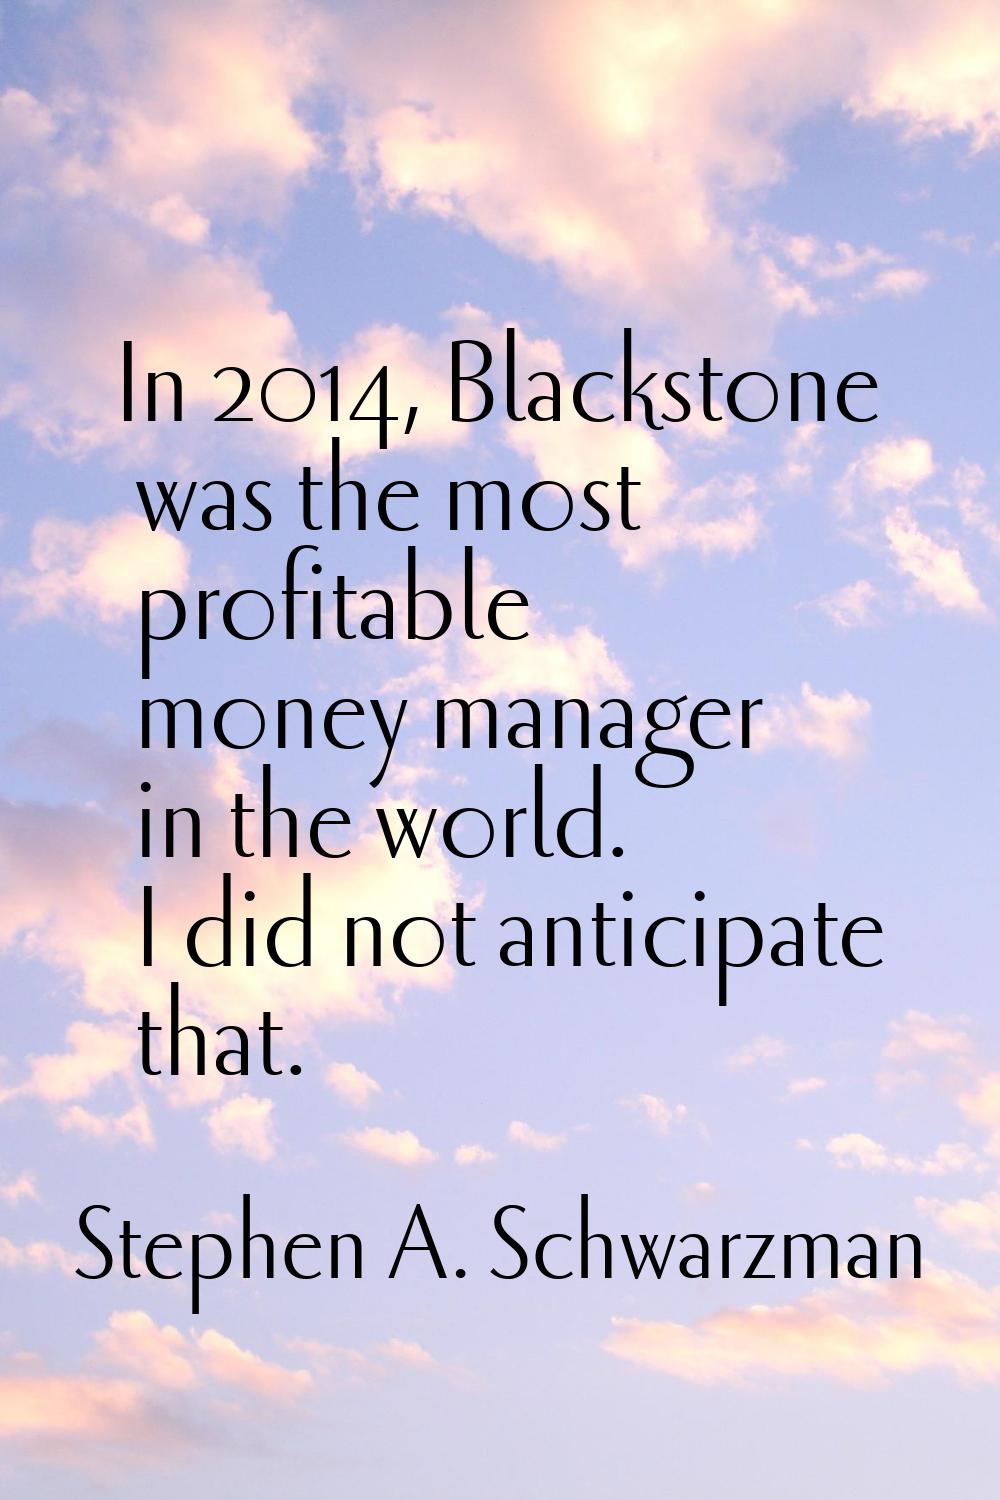 In 2014, Blackstone was the most profitable money manager in the world. I did not anticipate that.